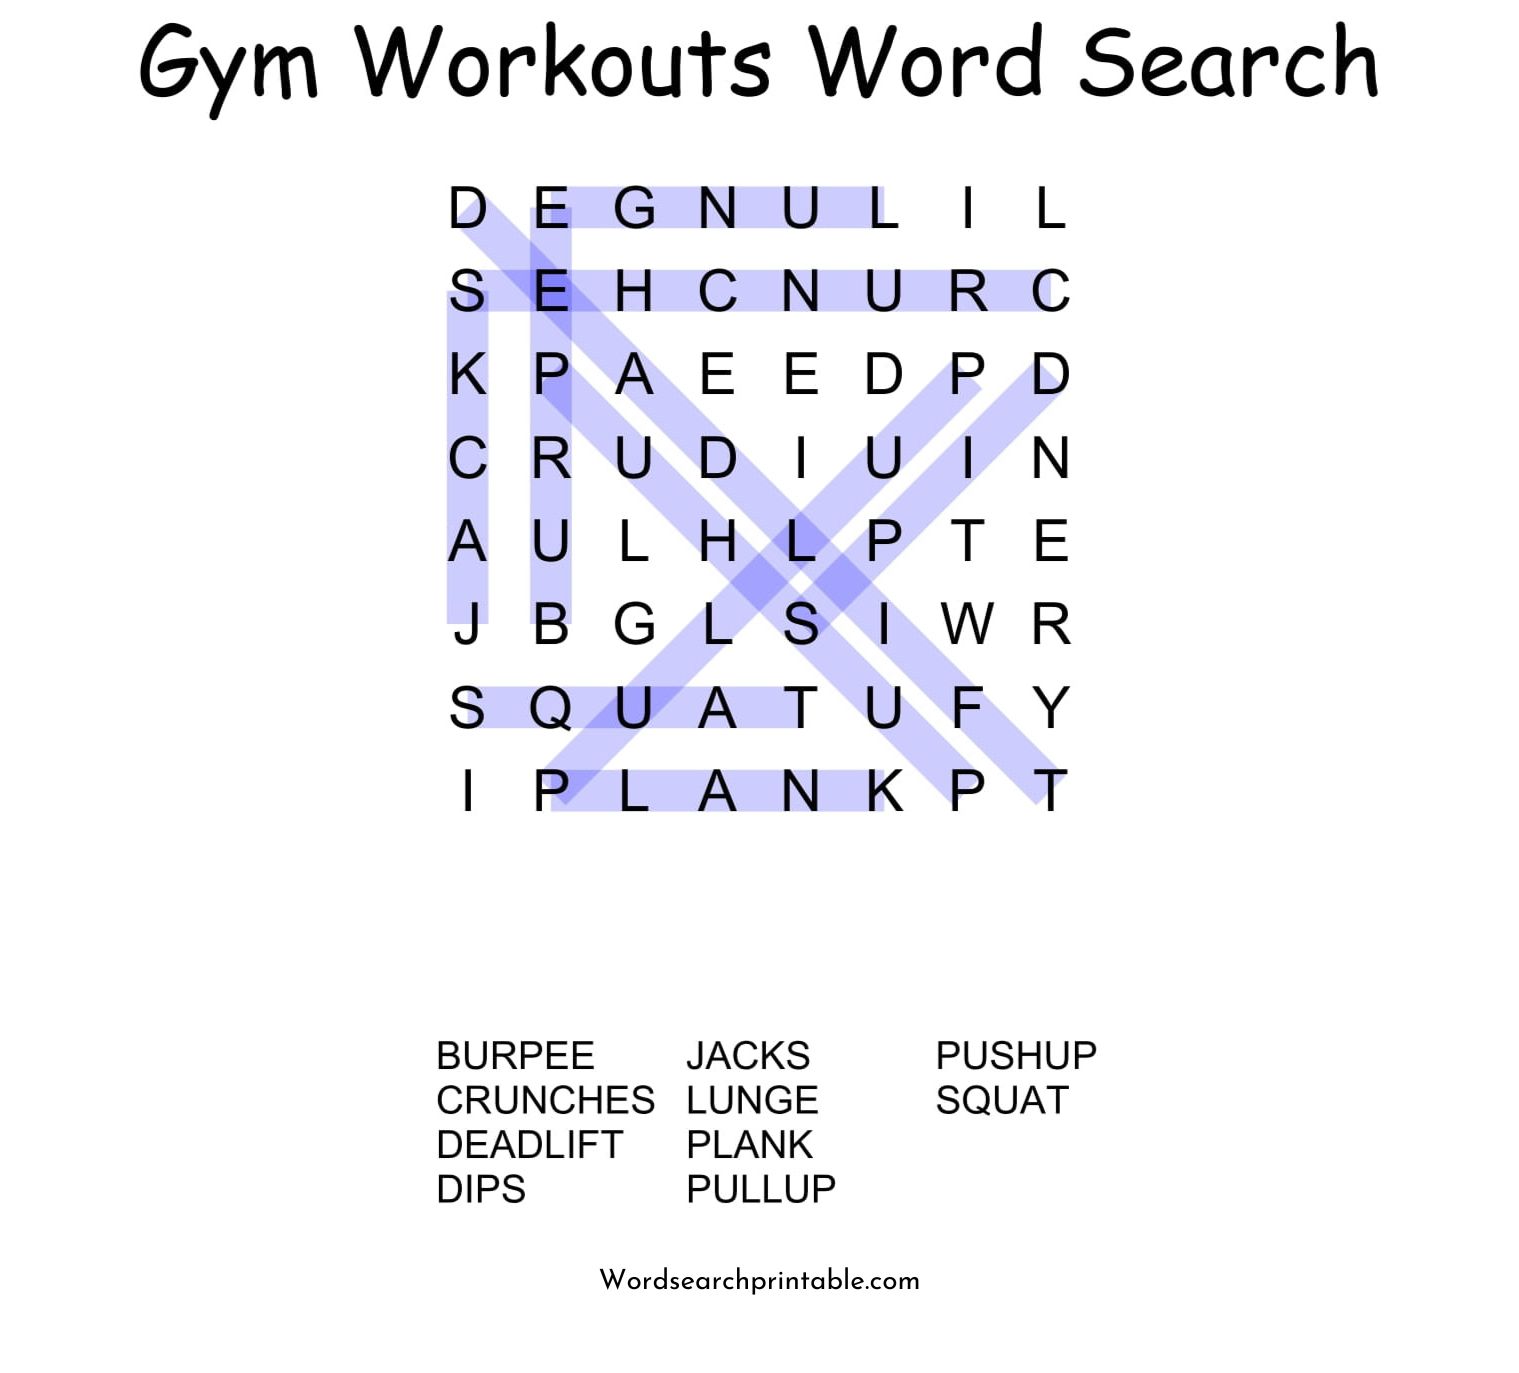 gym workouts word search puzzle solution